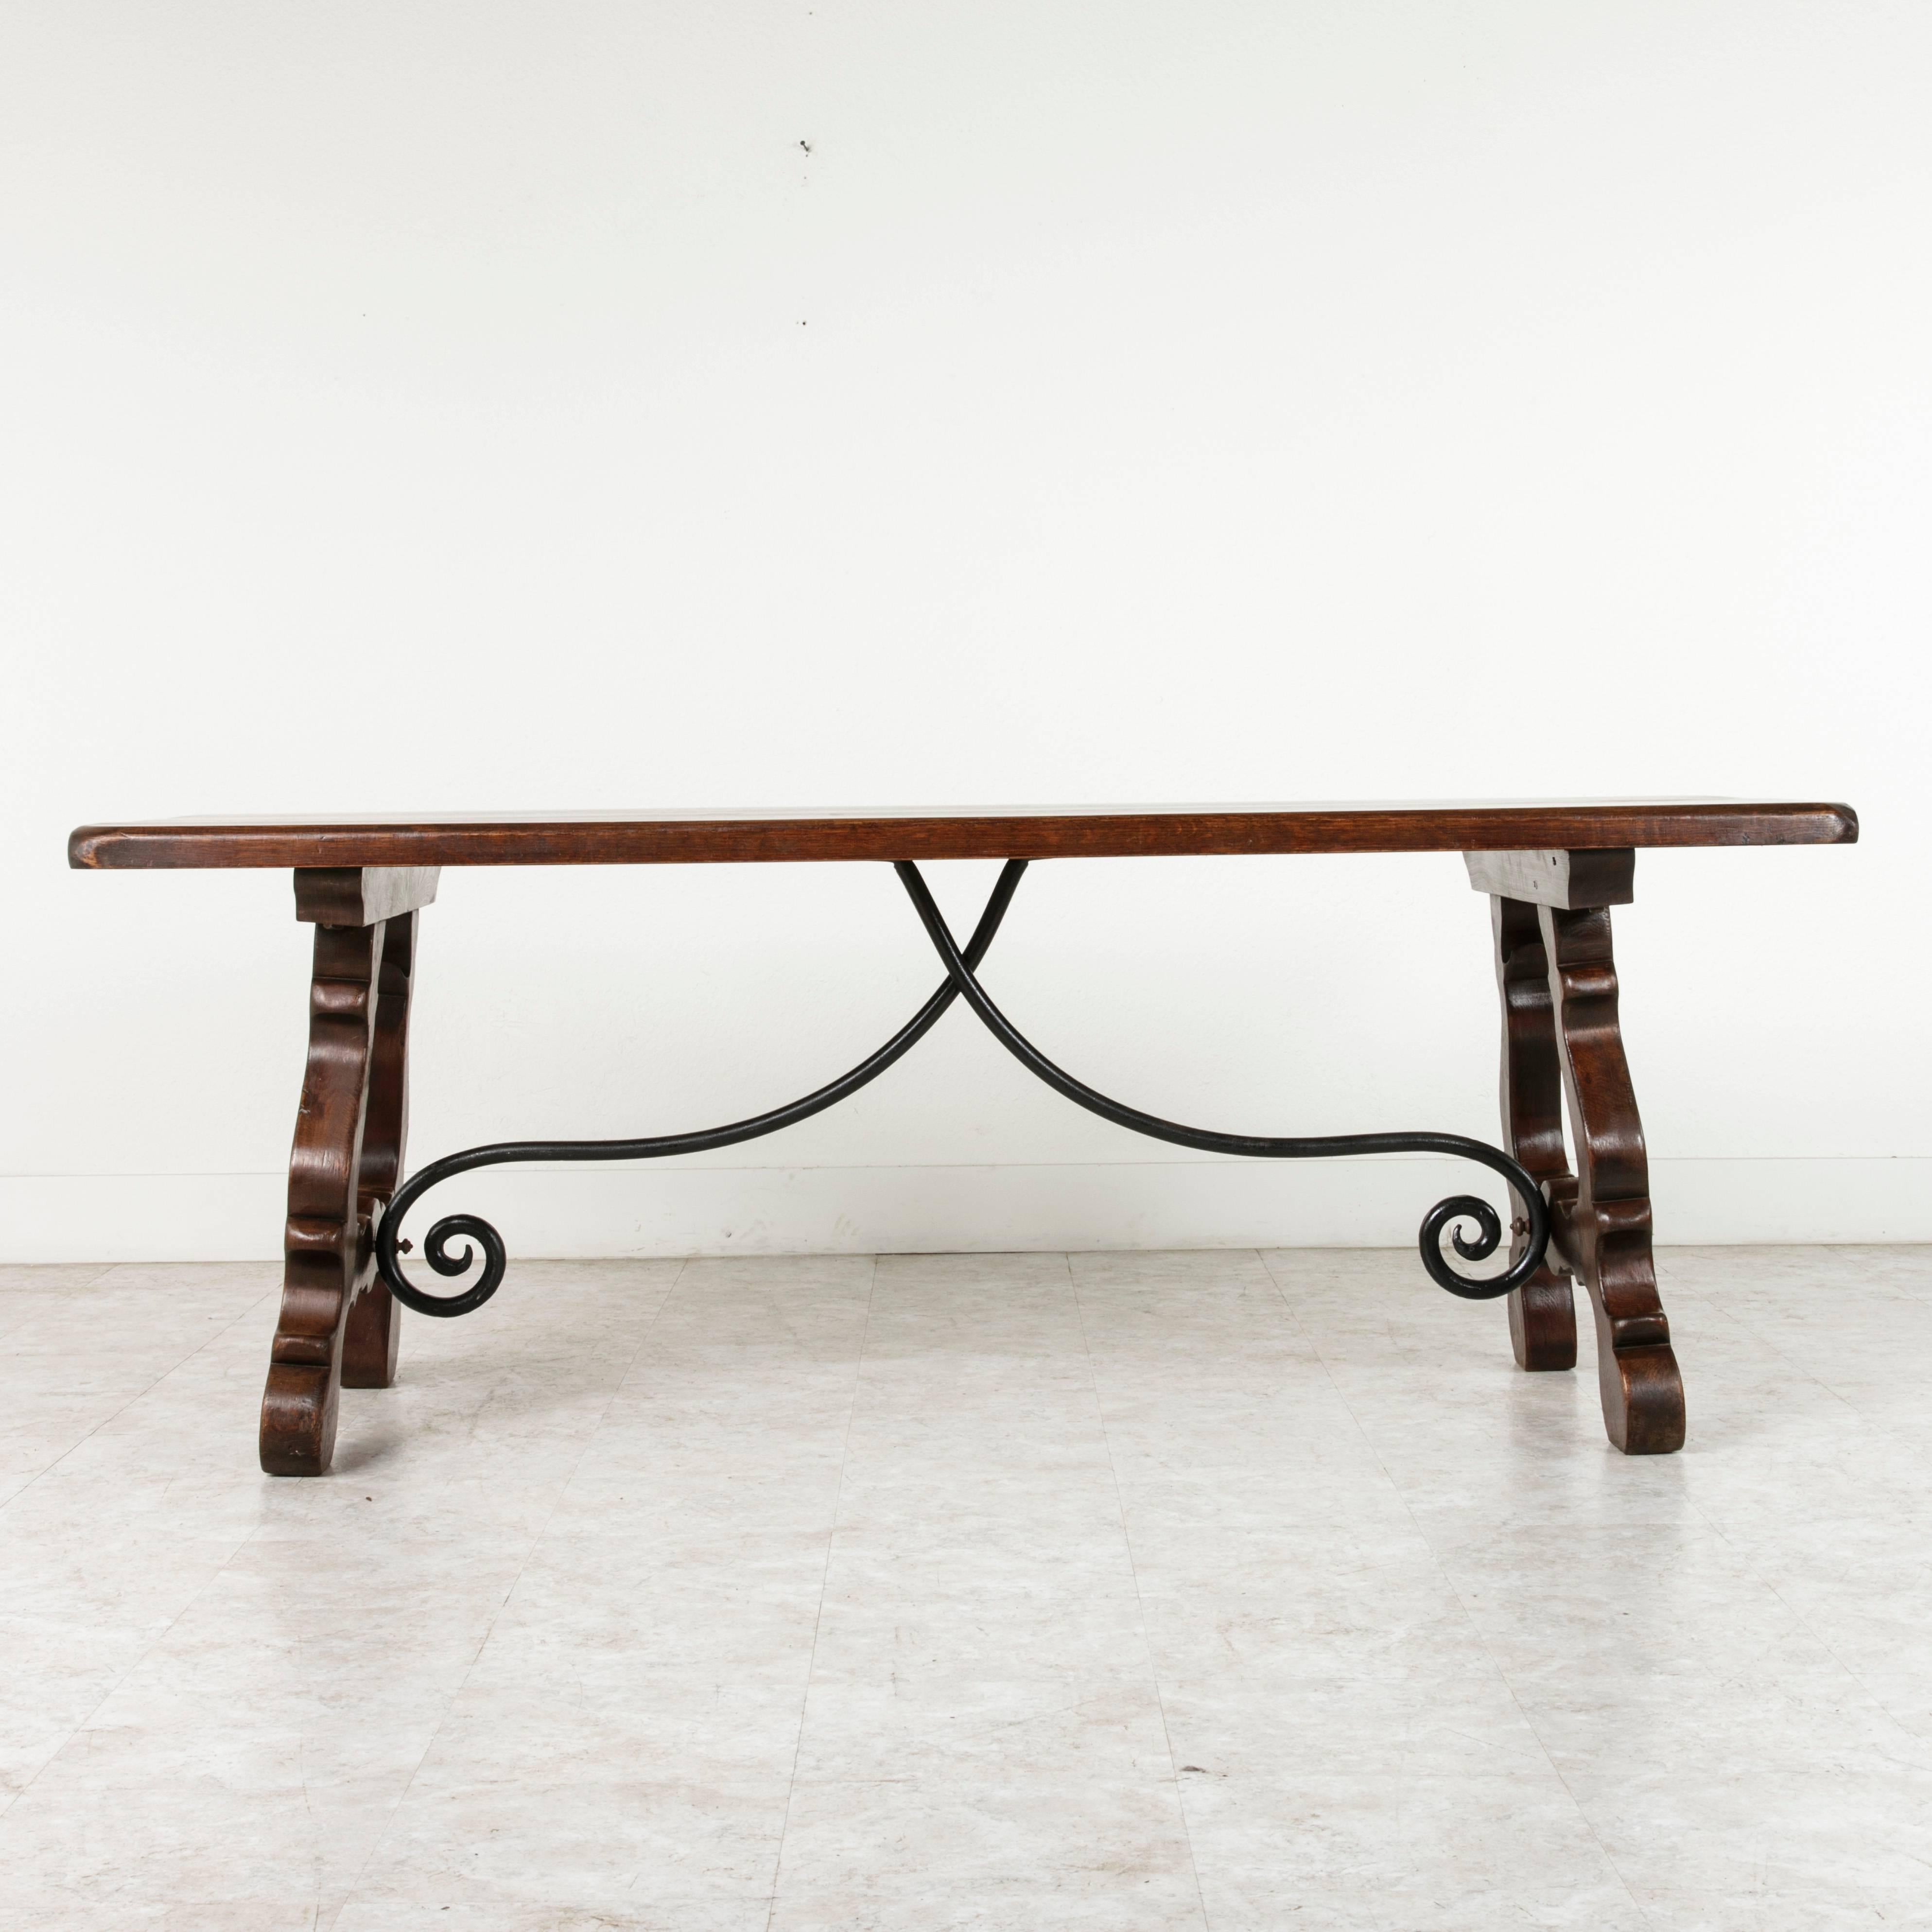 This beautifully carved Spanish Renaissance style dining, console or sofa table features a hand-forged wrought iron trestle support. Its thick solid oak construction and dark patina give it a handsome old world feel, while its carved legs and light